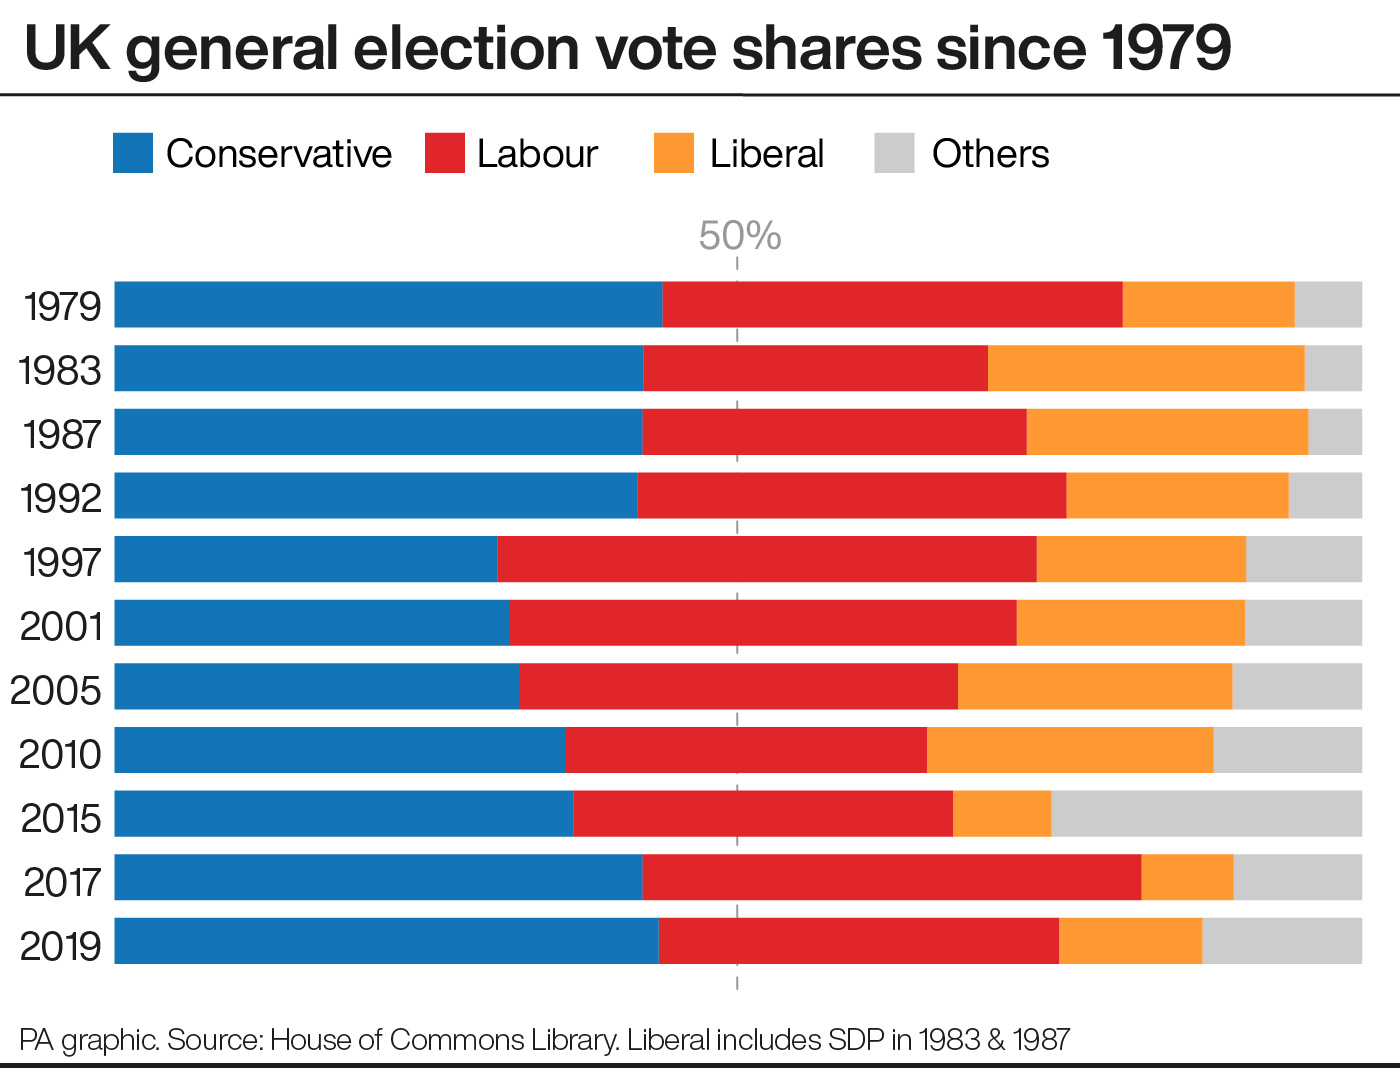 A chart showing the vote shares at general elections since 1979